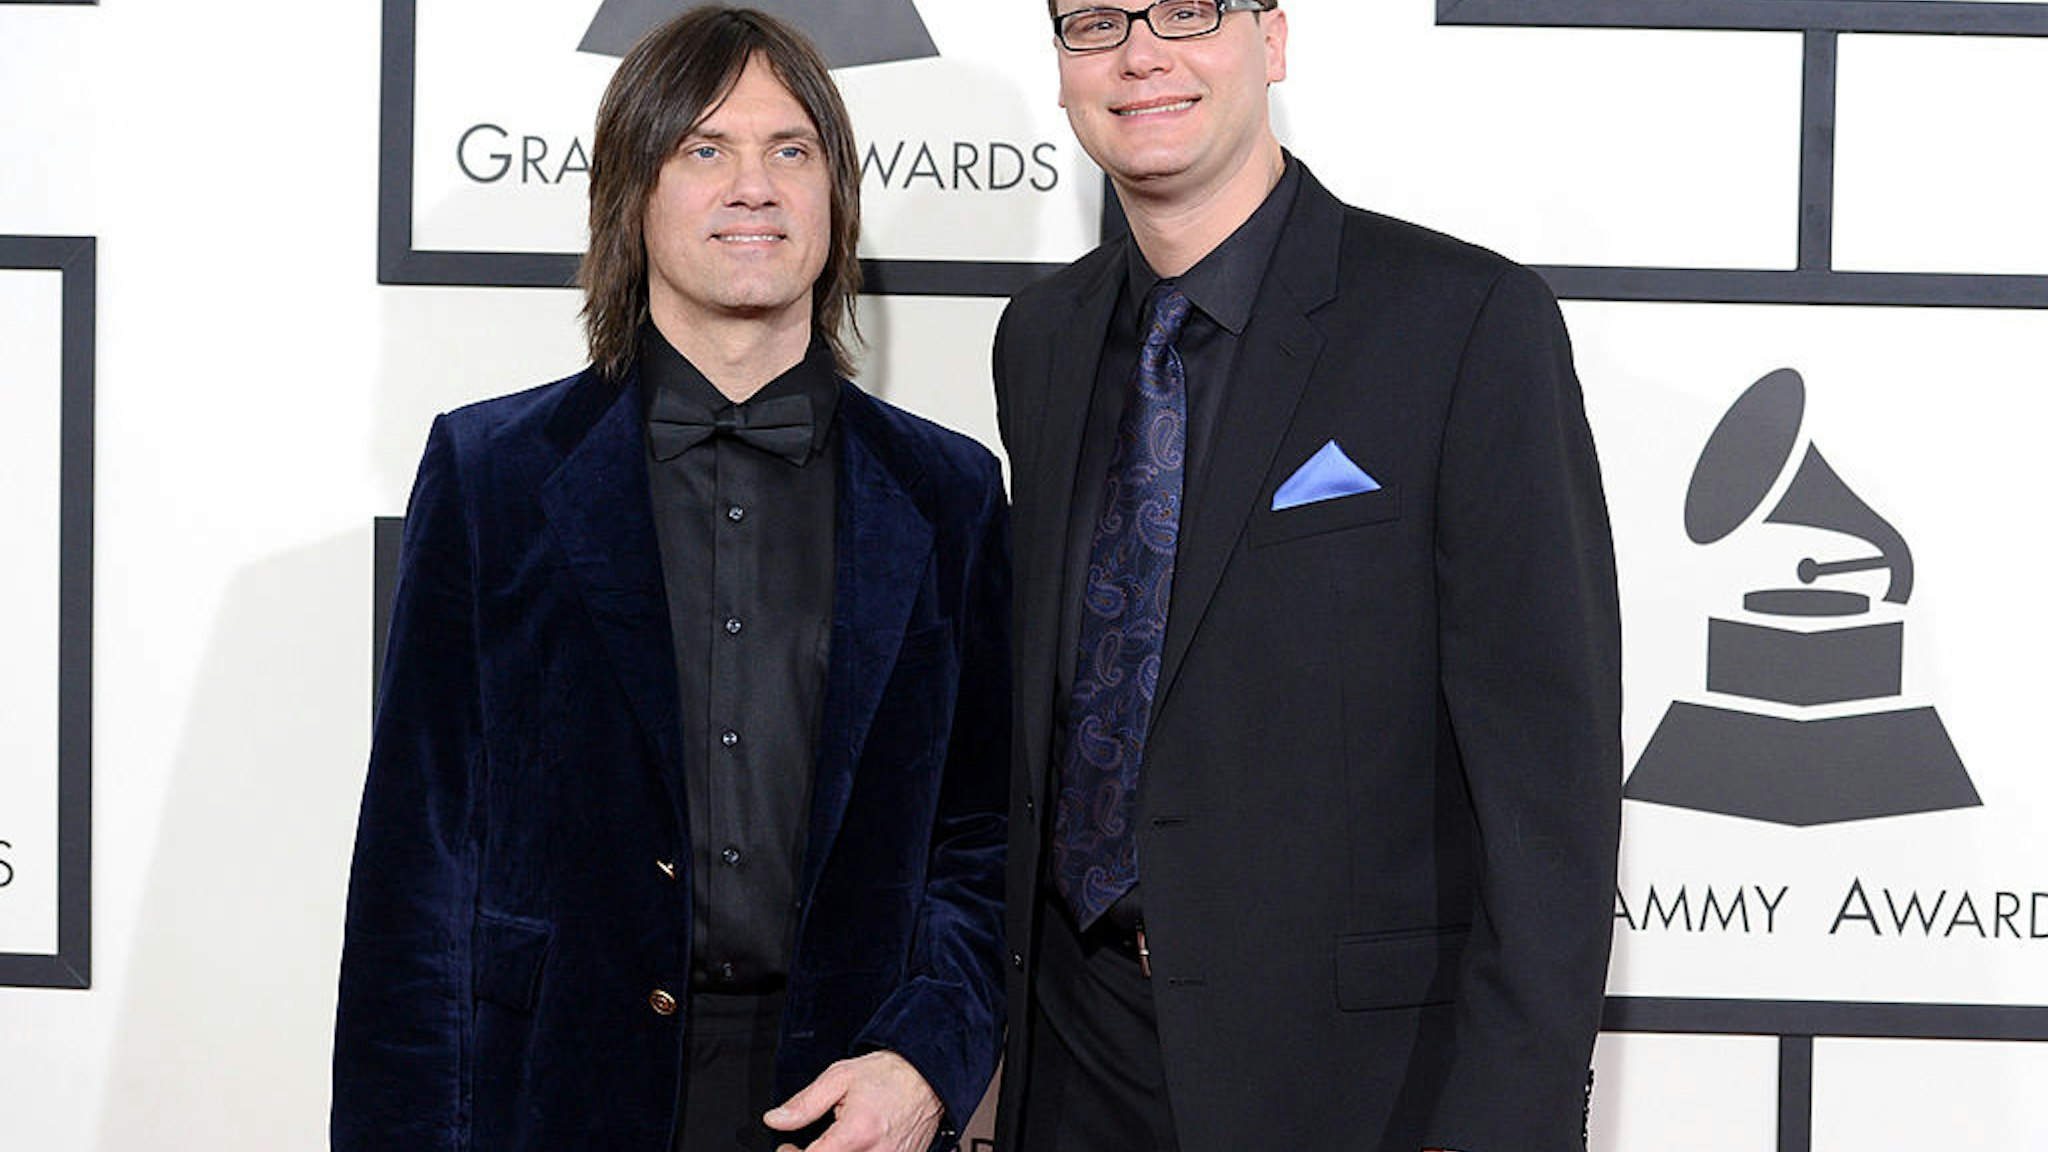 LOS ANGELES, CA - JANUARY 26: Musician Alastair Moock (R) and guest attend the 56th GRAMMY Awards at Staples Center on January 26, 2014 in Los Angeles, California. (Photo by Jason Merritt/Getty Images)